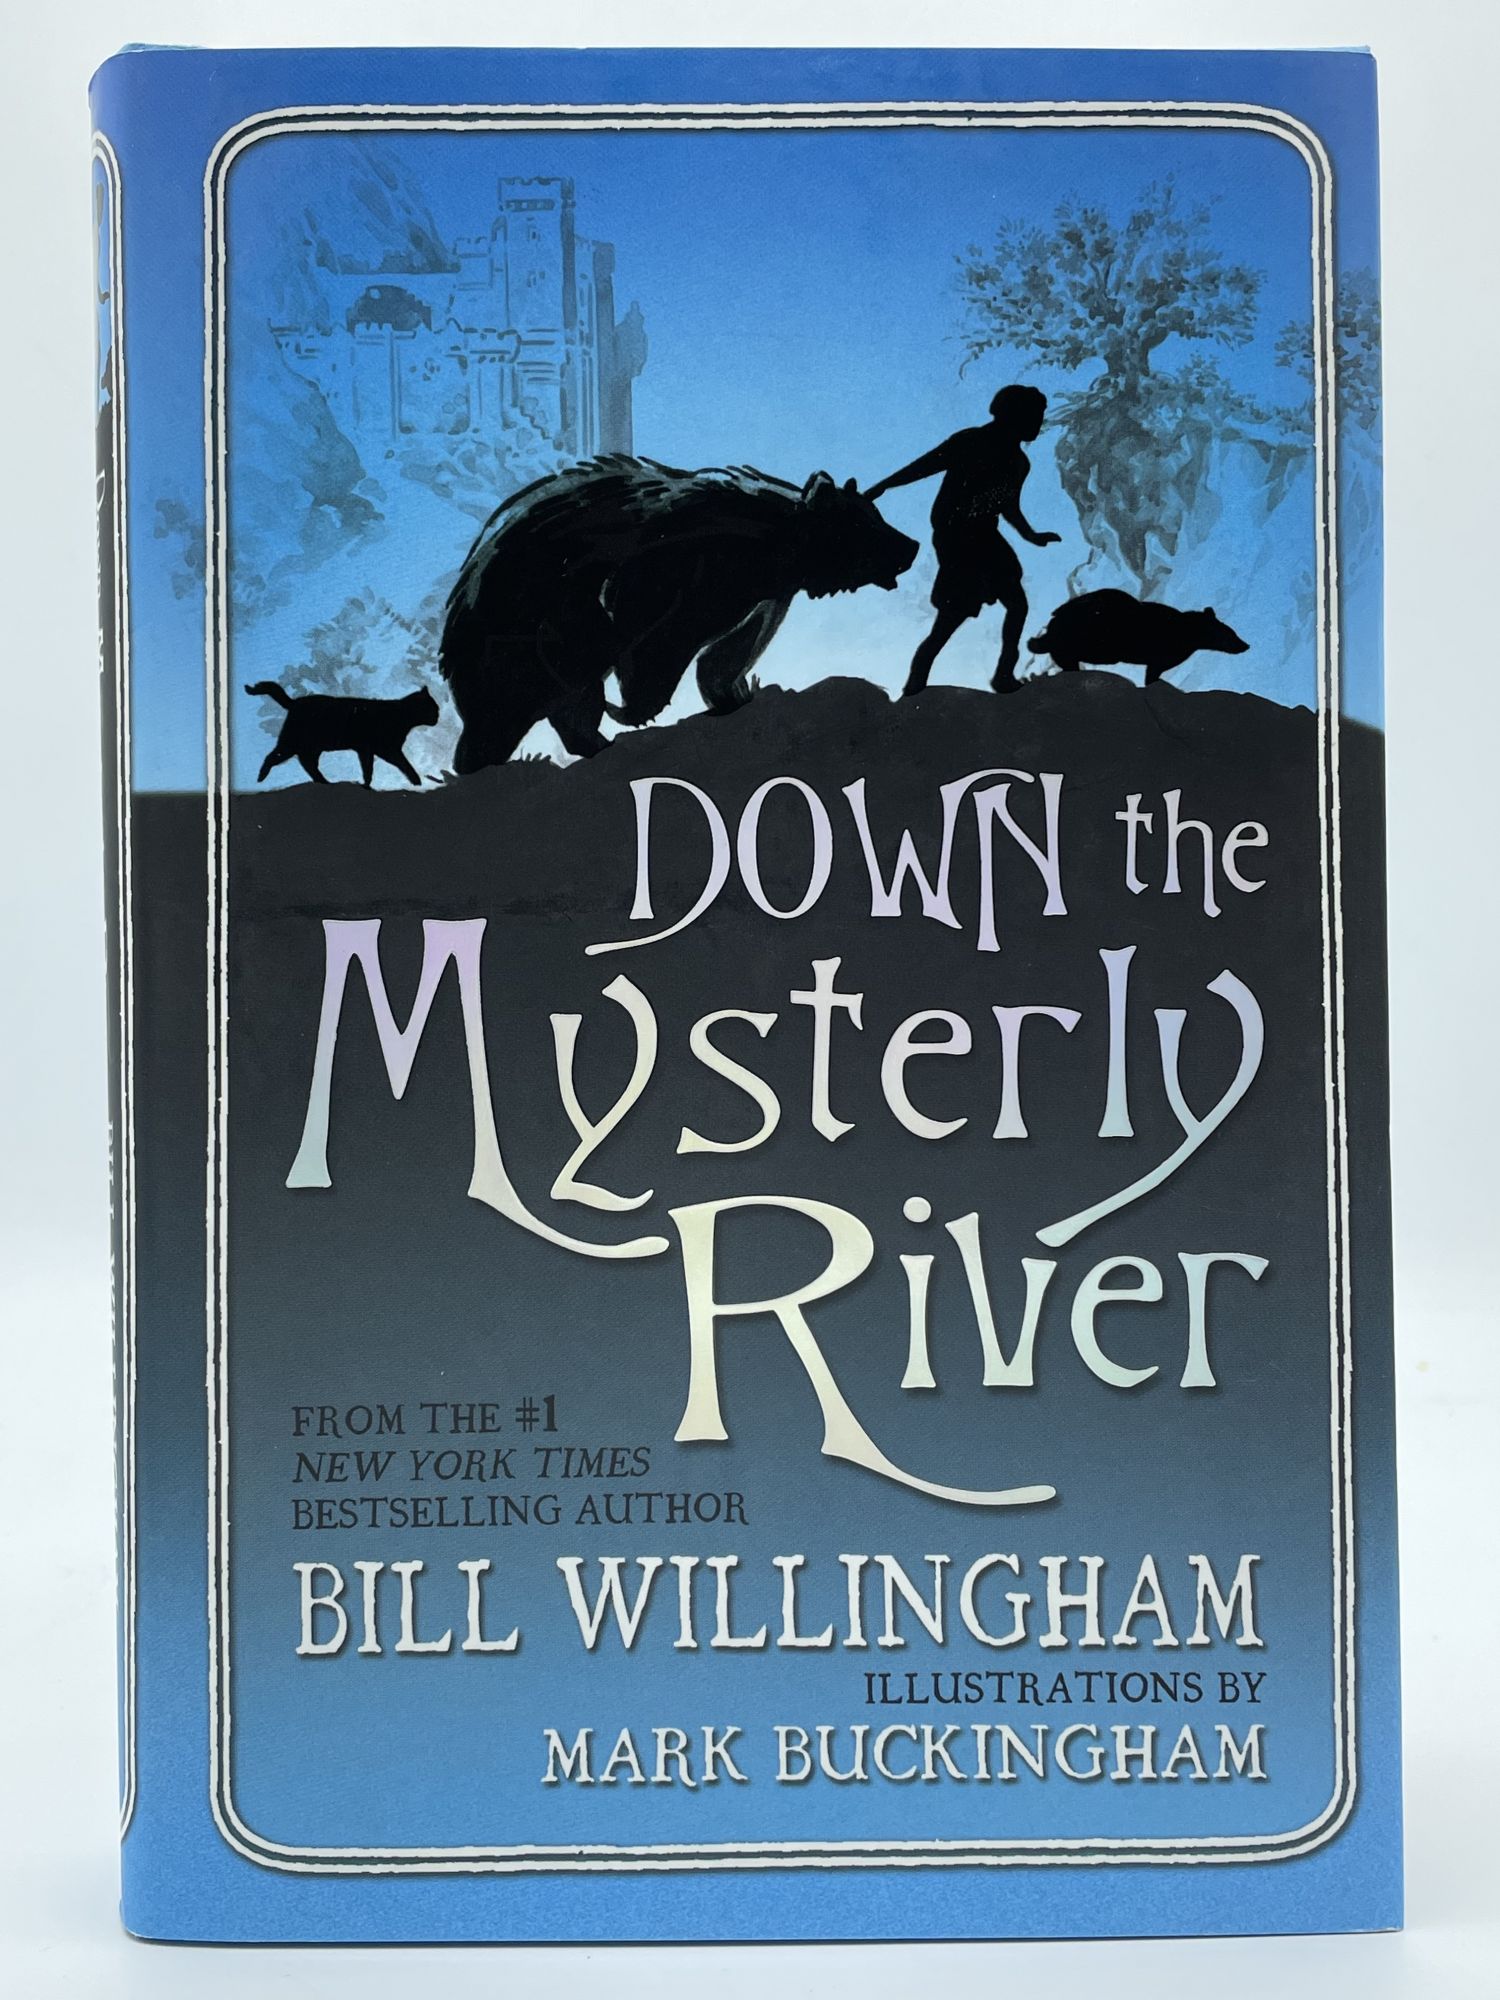 Down the Mysterly River WILLINGHAM, Bill [SIGNED]; BUCKINGHAM, Mark (illustrator) [Fine] [Hardcover] 8vo. Boards. Dust jacket. 333 pp. Inscribed by Willingham on title page. This is a signed first printing fantasy novel by Willingham and Buckingham, creators of the award-winning Fables comics series. This is Willingham's first children's book and features an art style similar to Fables, though it is not set in that universe.